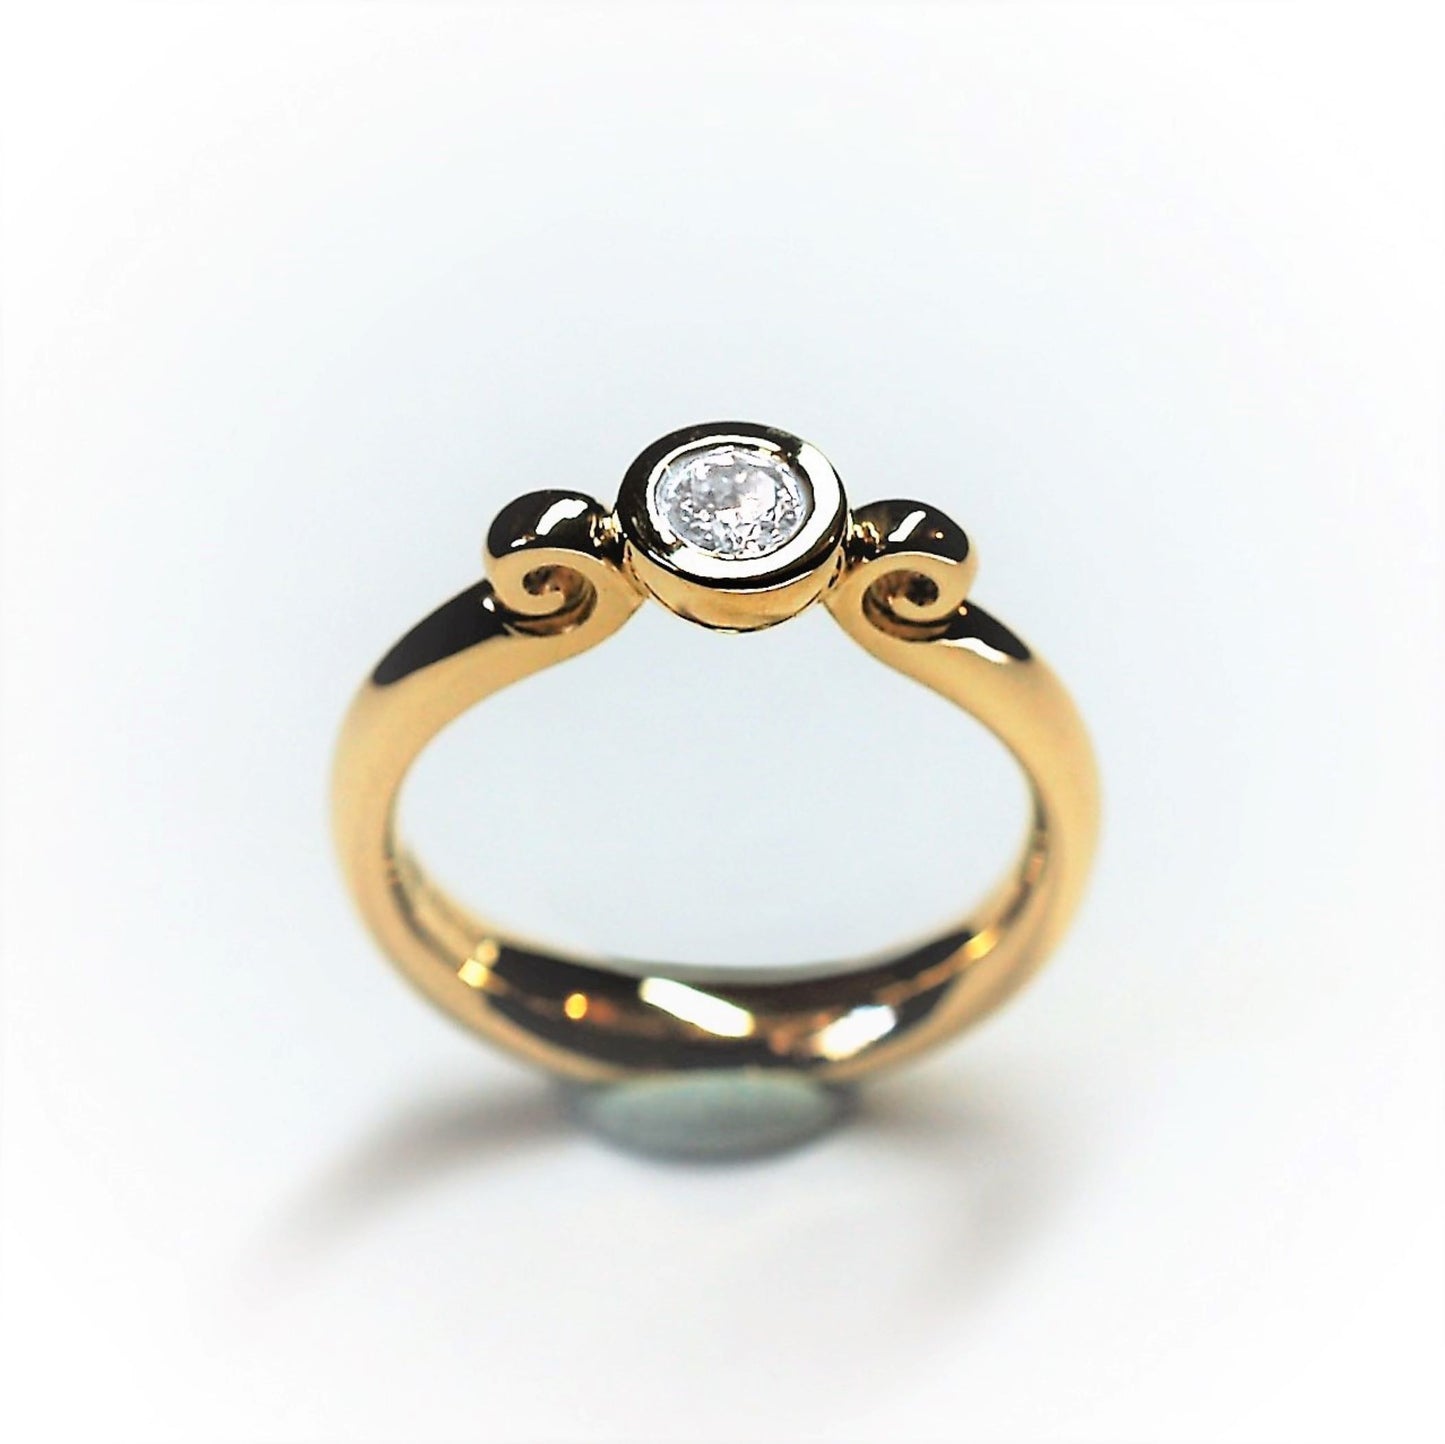 Genuine Fairtrade 18ct gold and 0.16ct Cultured Diamond, environmentally and ethically responsible handmade ring. *This piece is ready to be shipped*